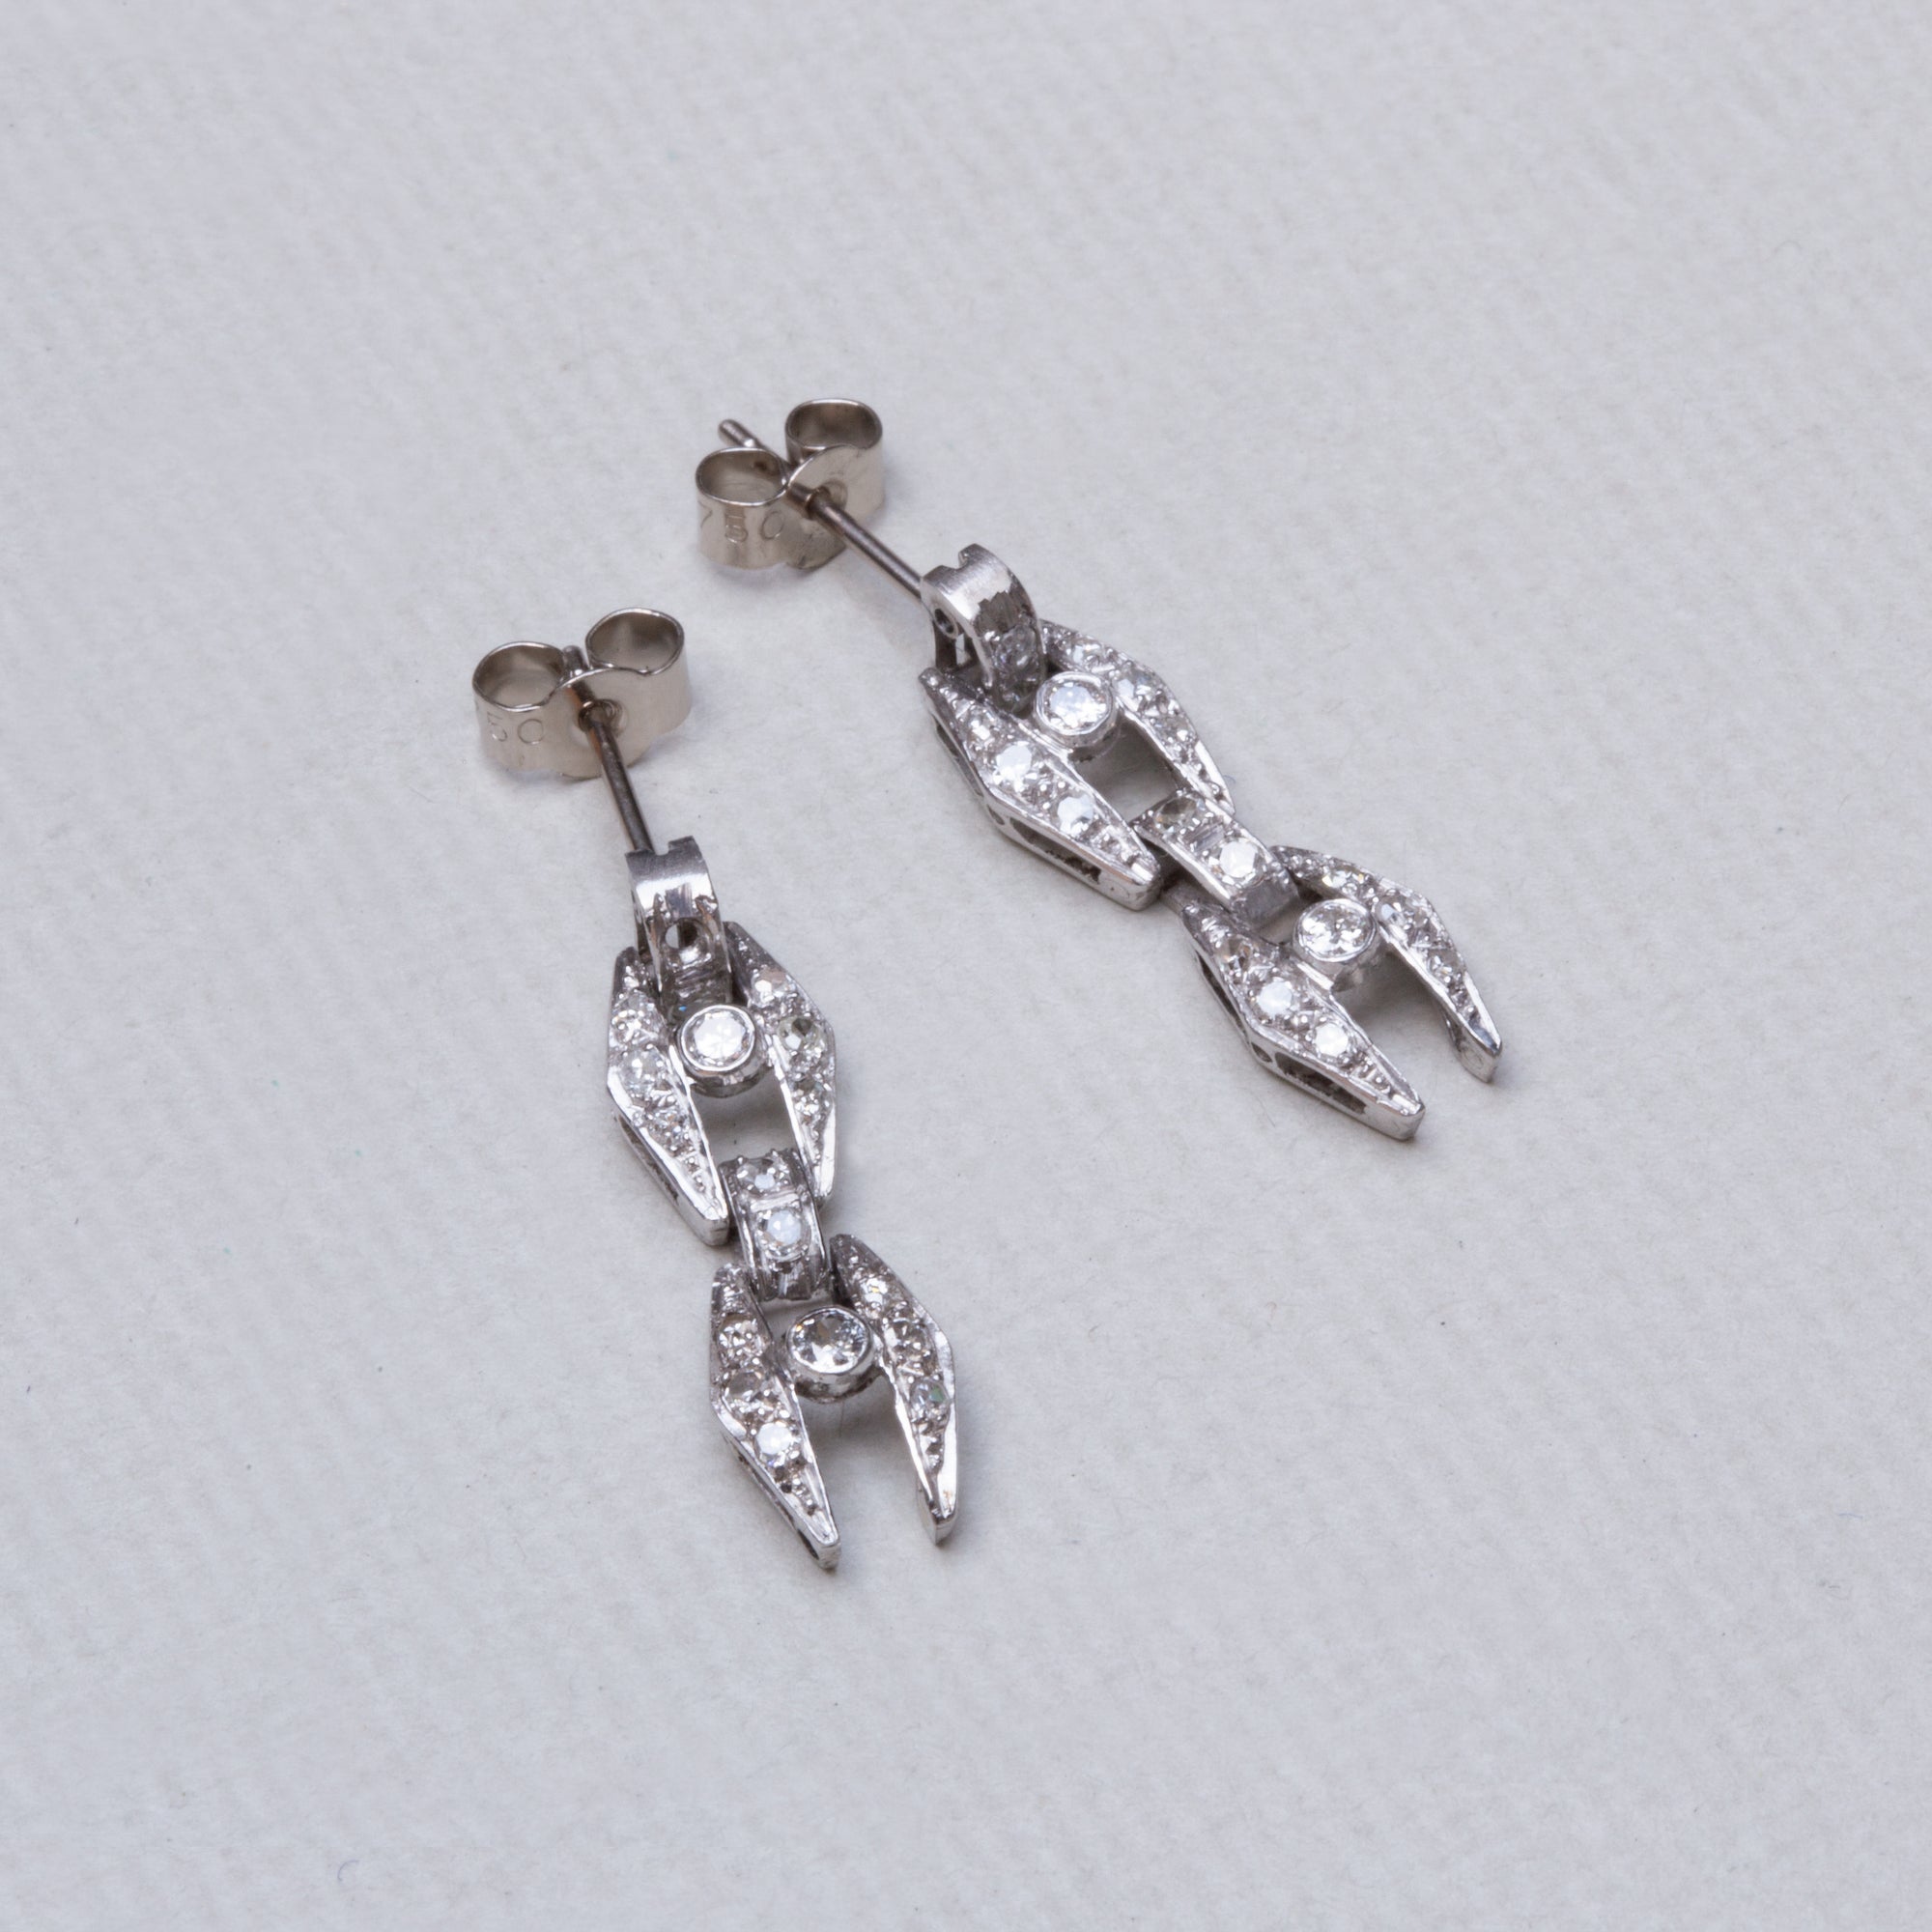 Vintage White Gold Stud Earrings with Diamonds